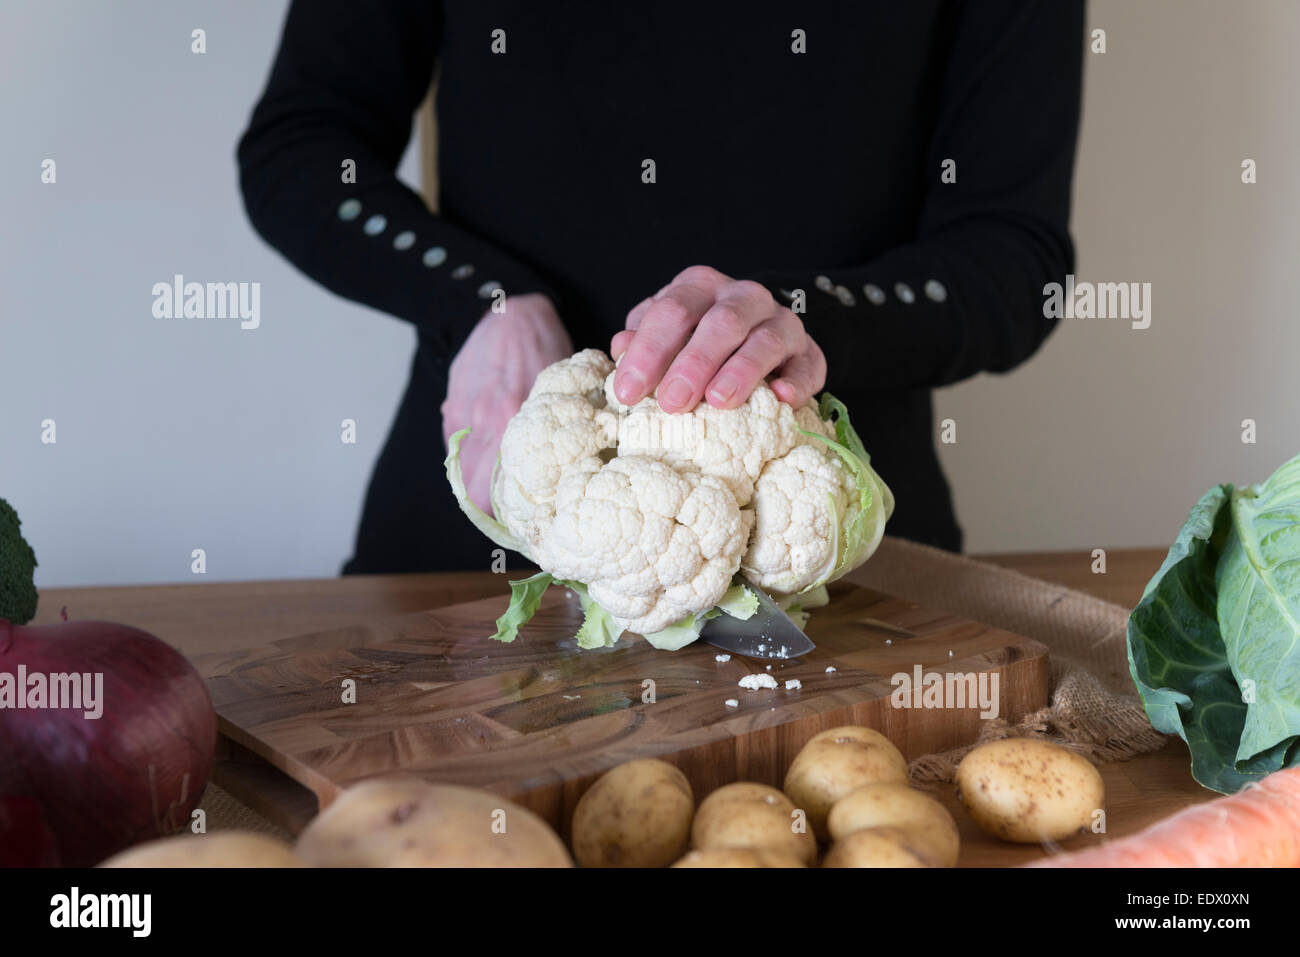 A womans hands slicing Cauliflower for a recipe. Stock Photo